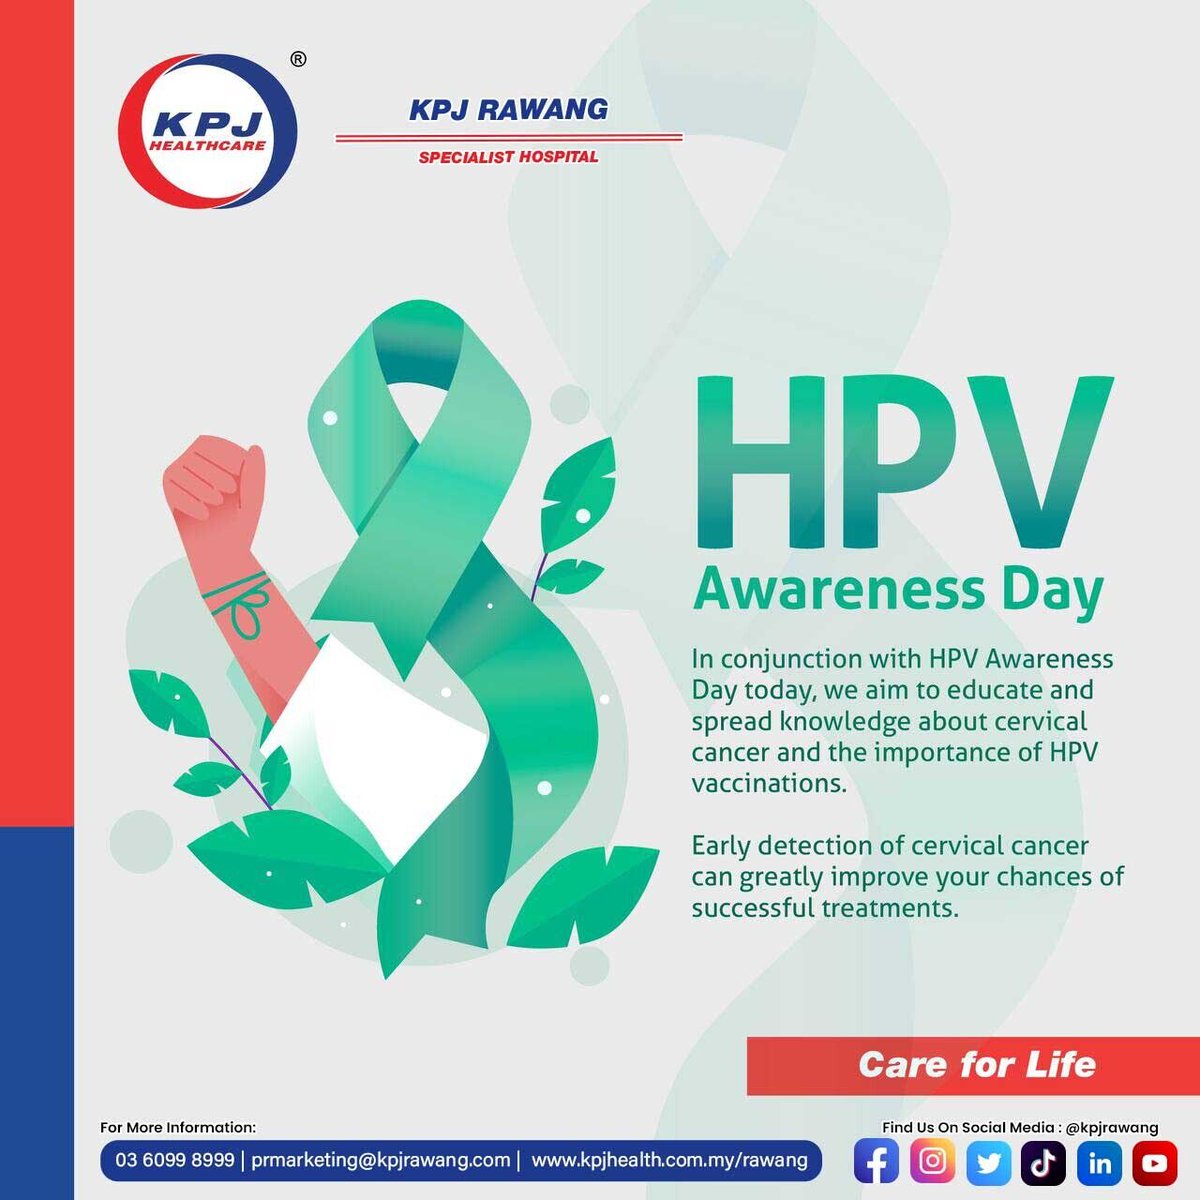 @kpjrawang: In conjunction with HPV Awareness Day today, we aim to educate ...